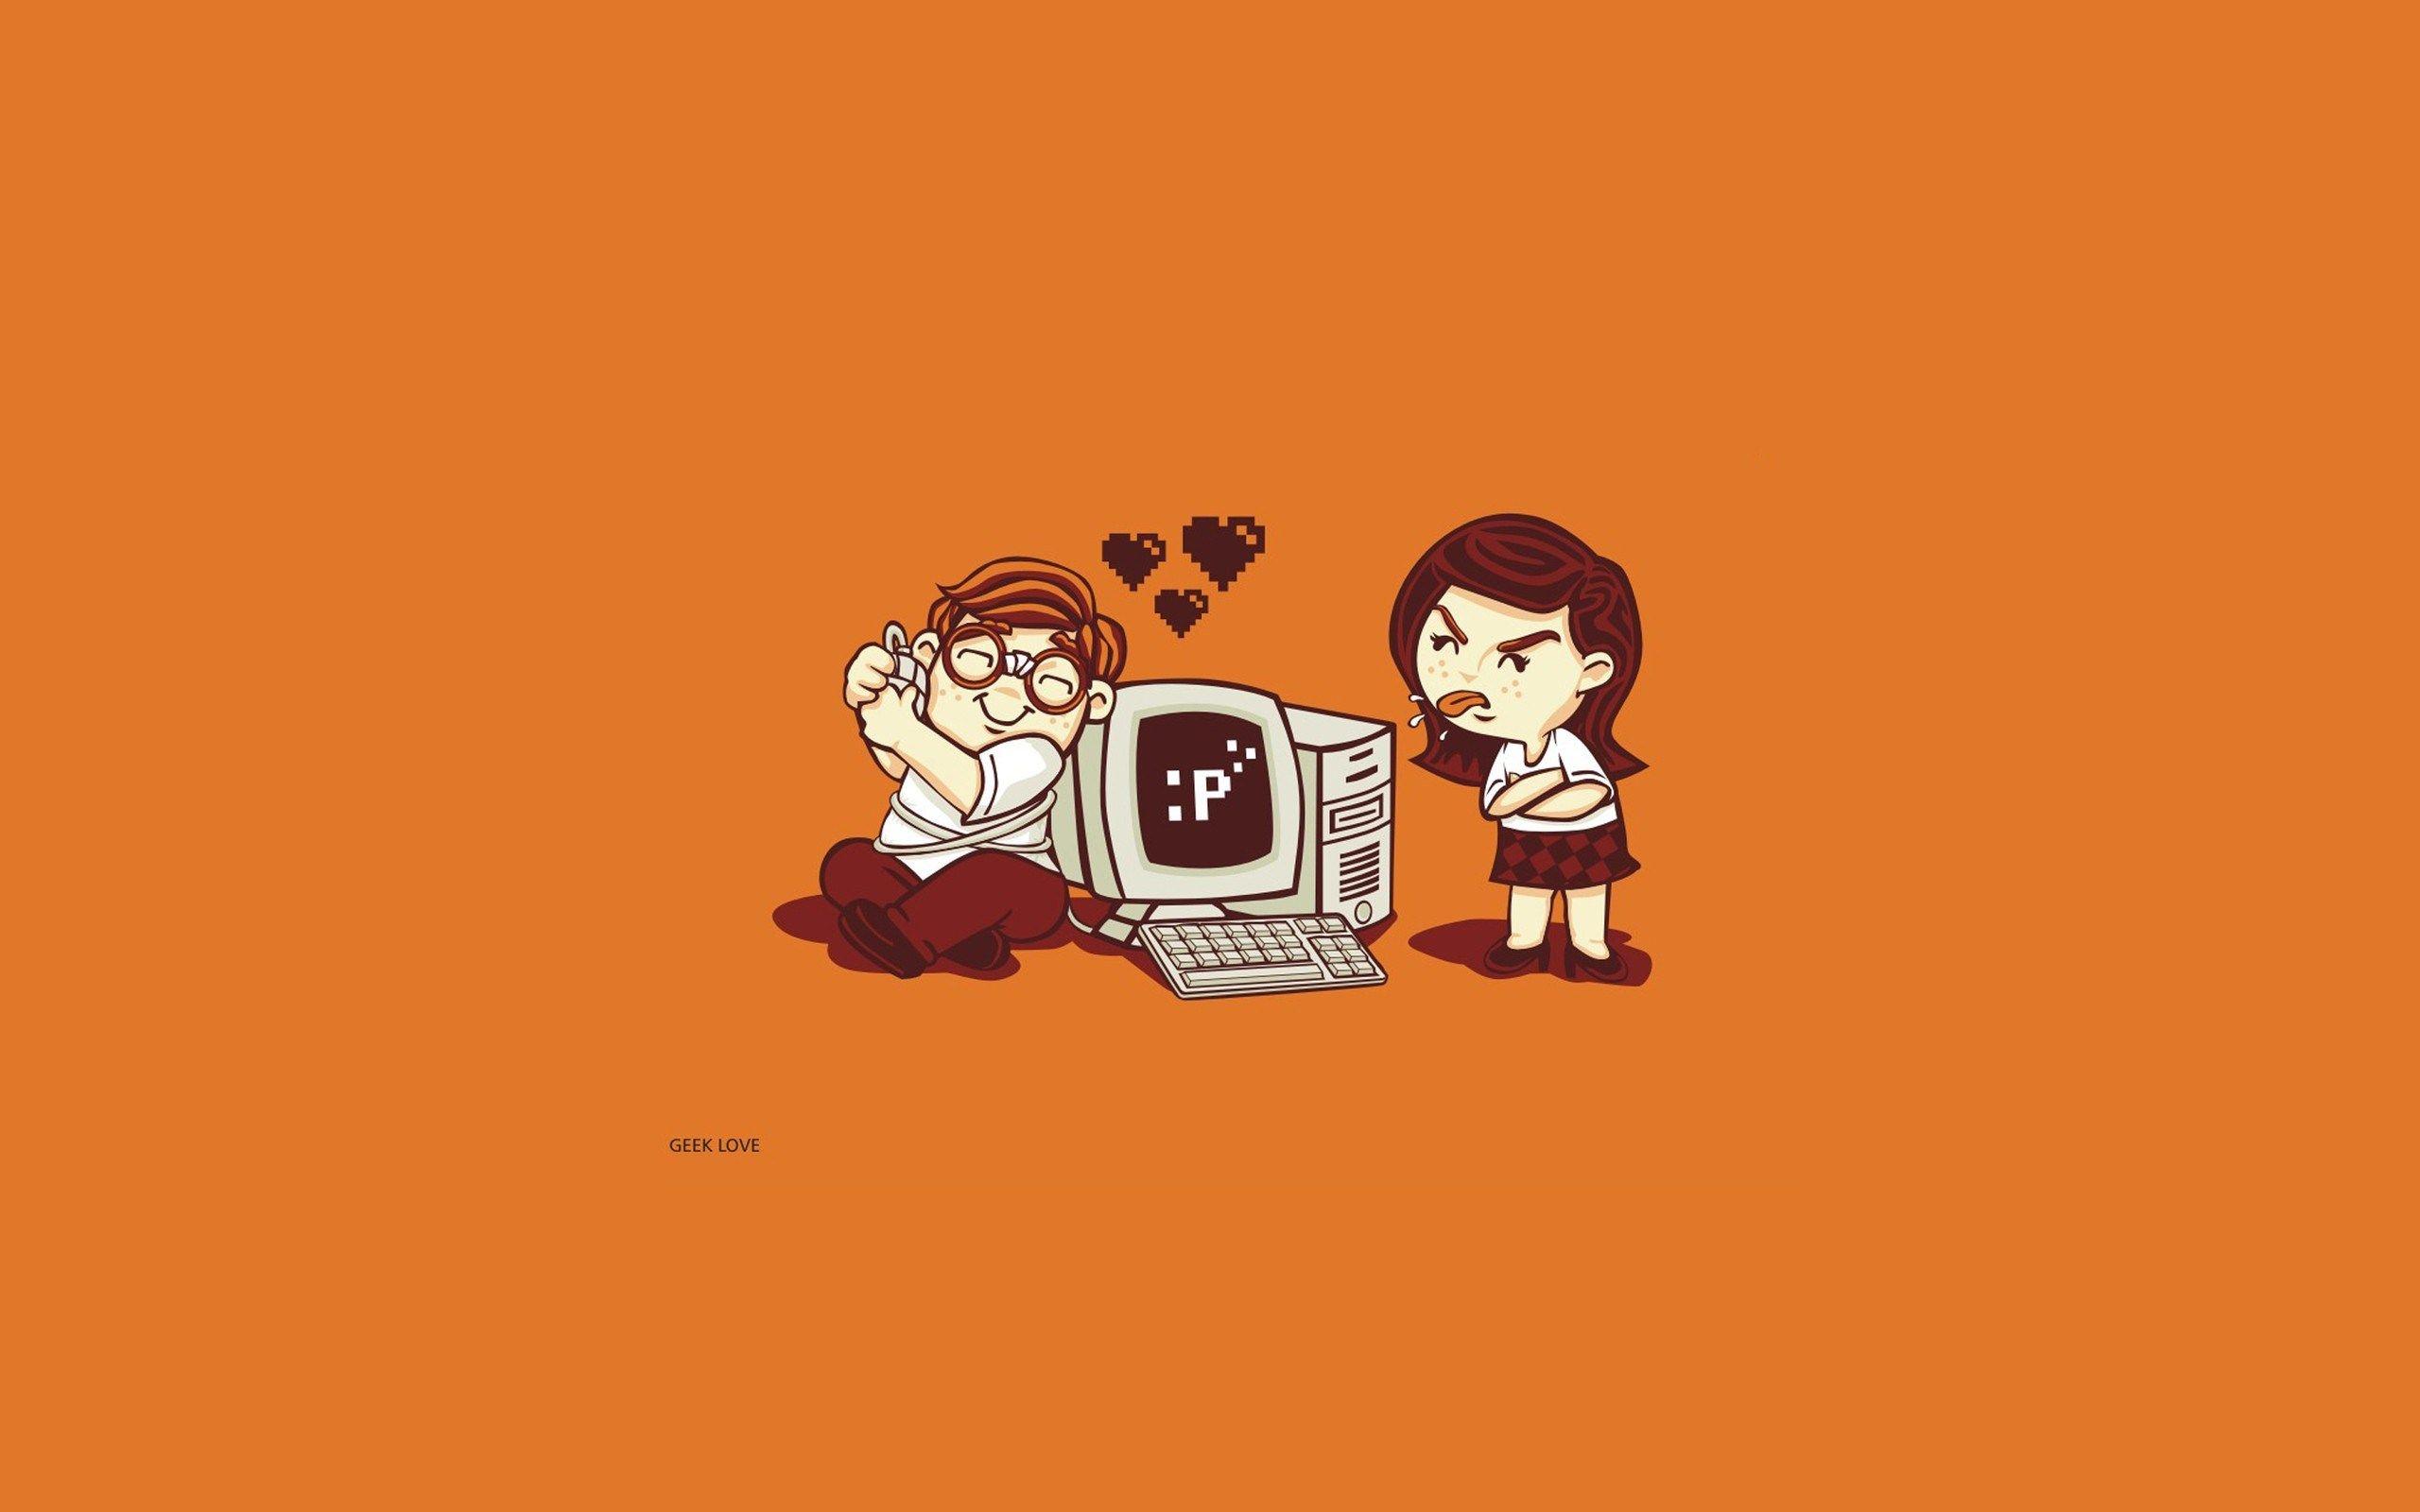 Awesome Geek Wallpaper For All Geeks & Nerds